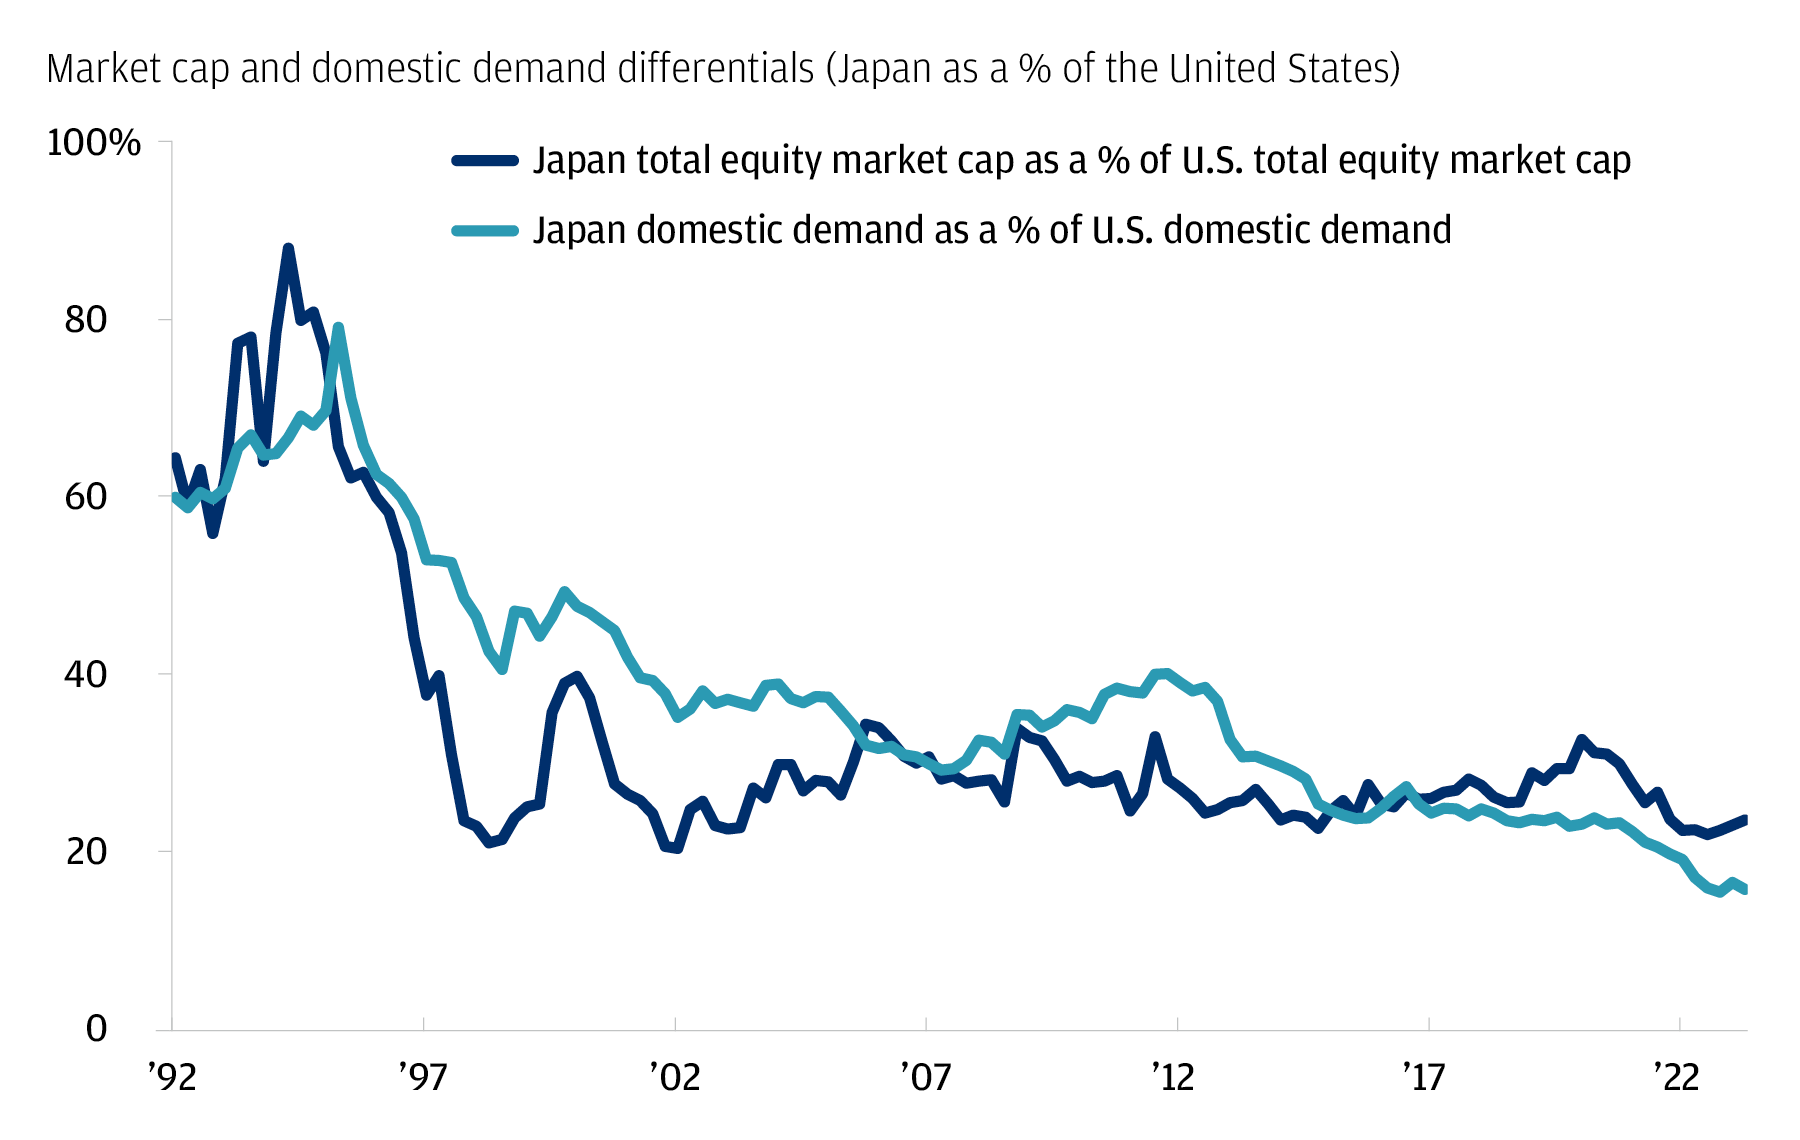 The chart describes the market cap and domestic demand differentials (Japan as a % of the U.S.)